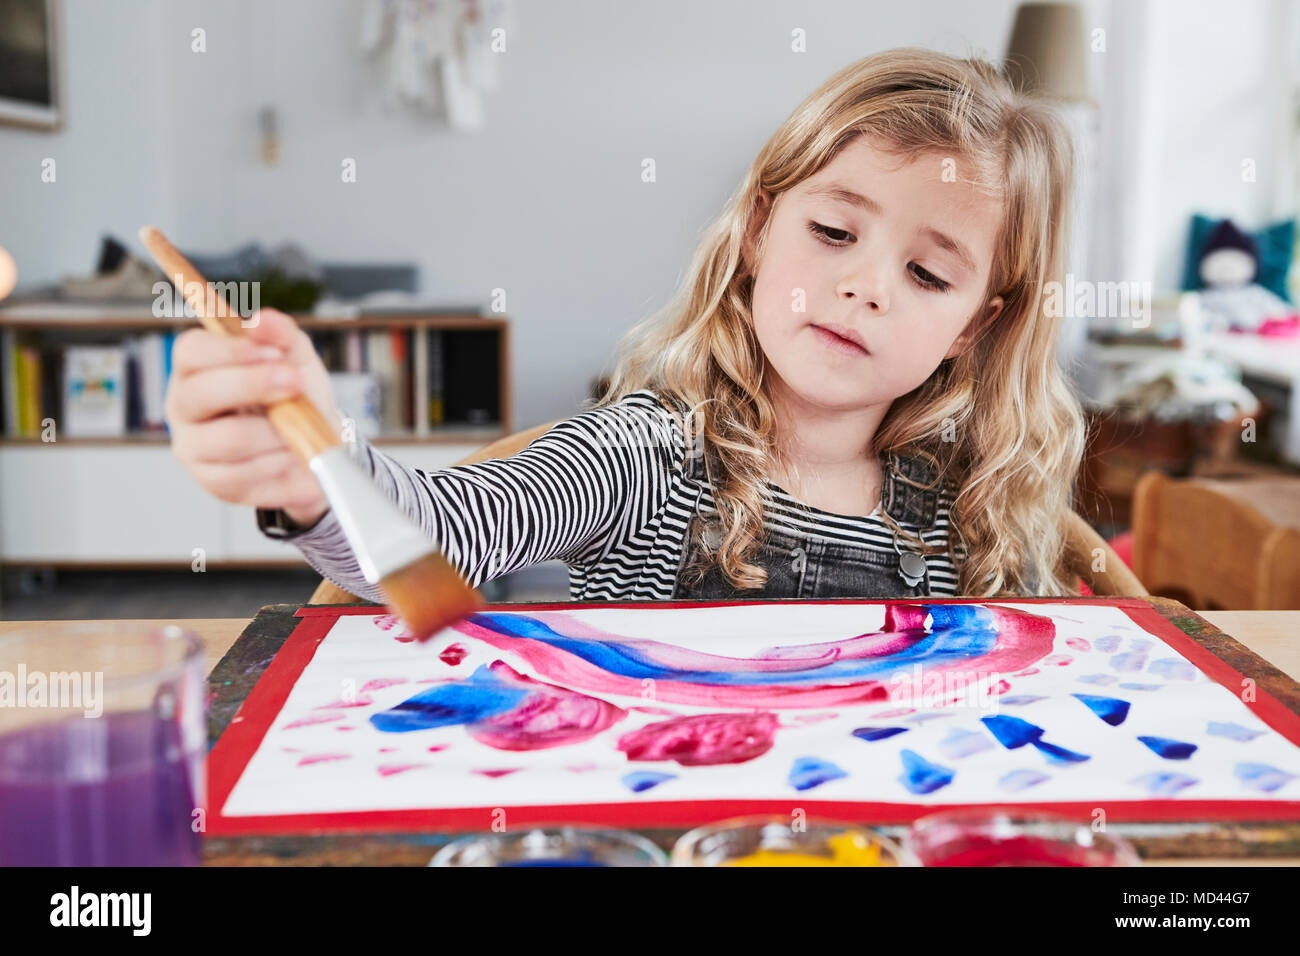 Young girl sitting at table, painting picture Stock Photo